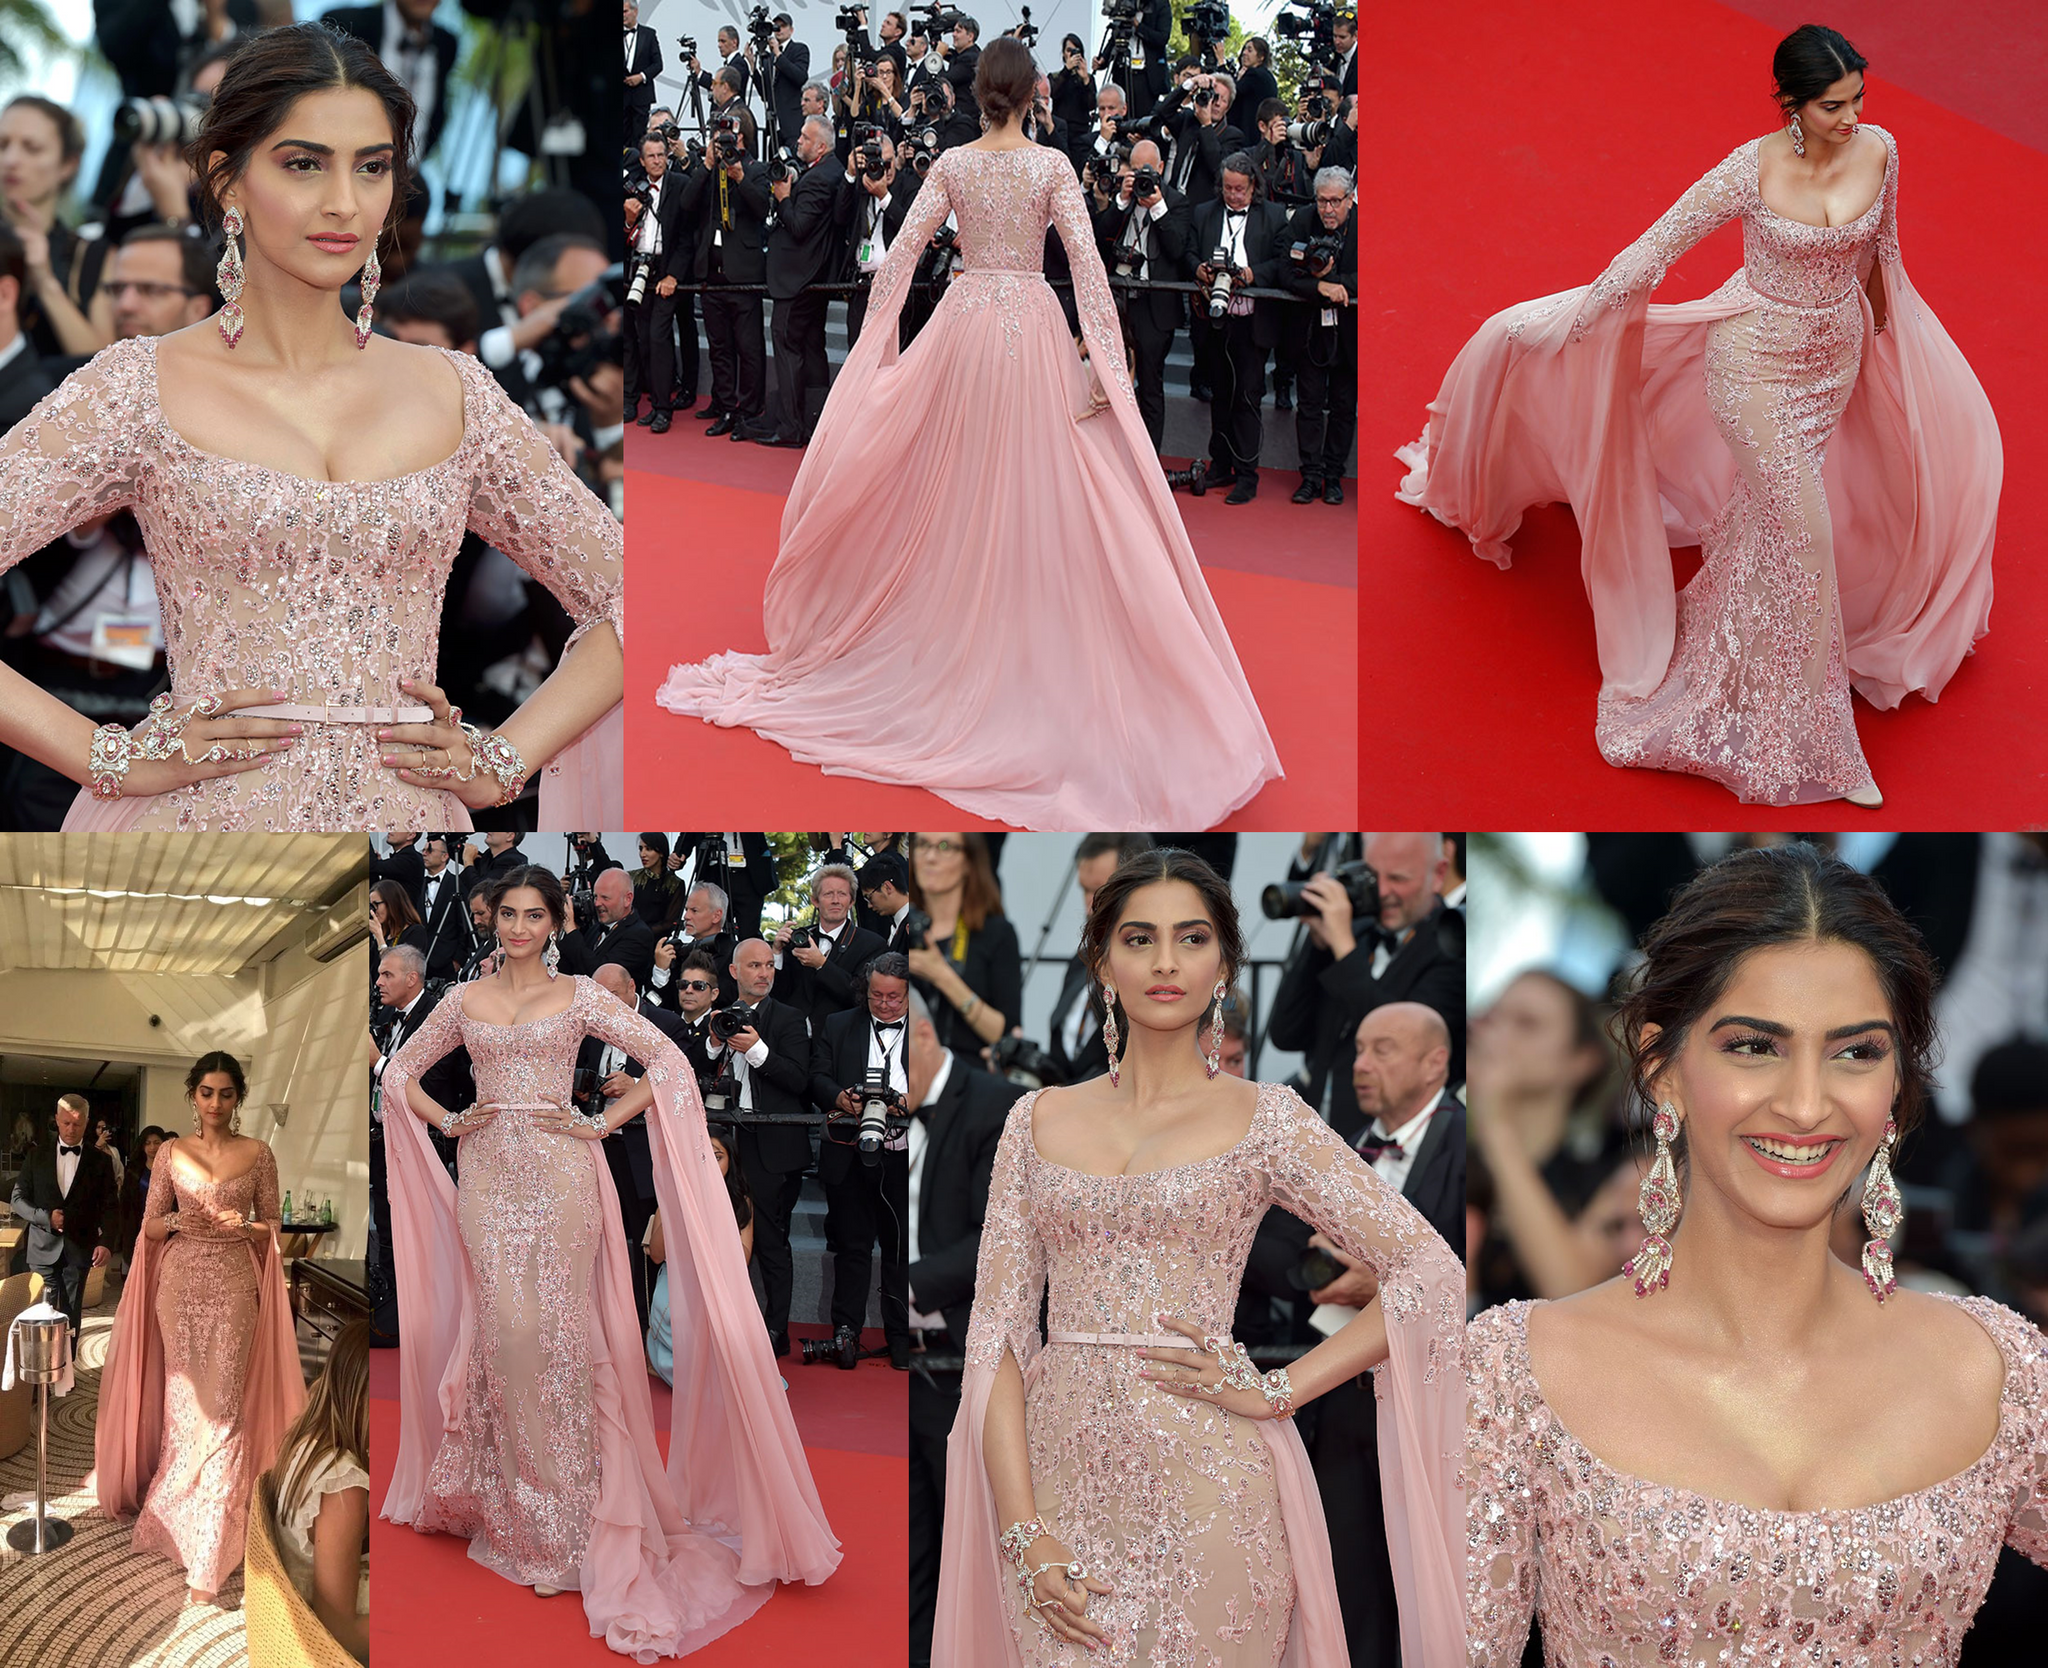 Sonam Kapoor Looked Gorgeous in Pink Gown